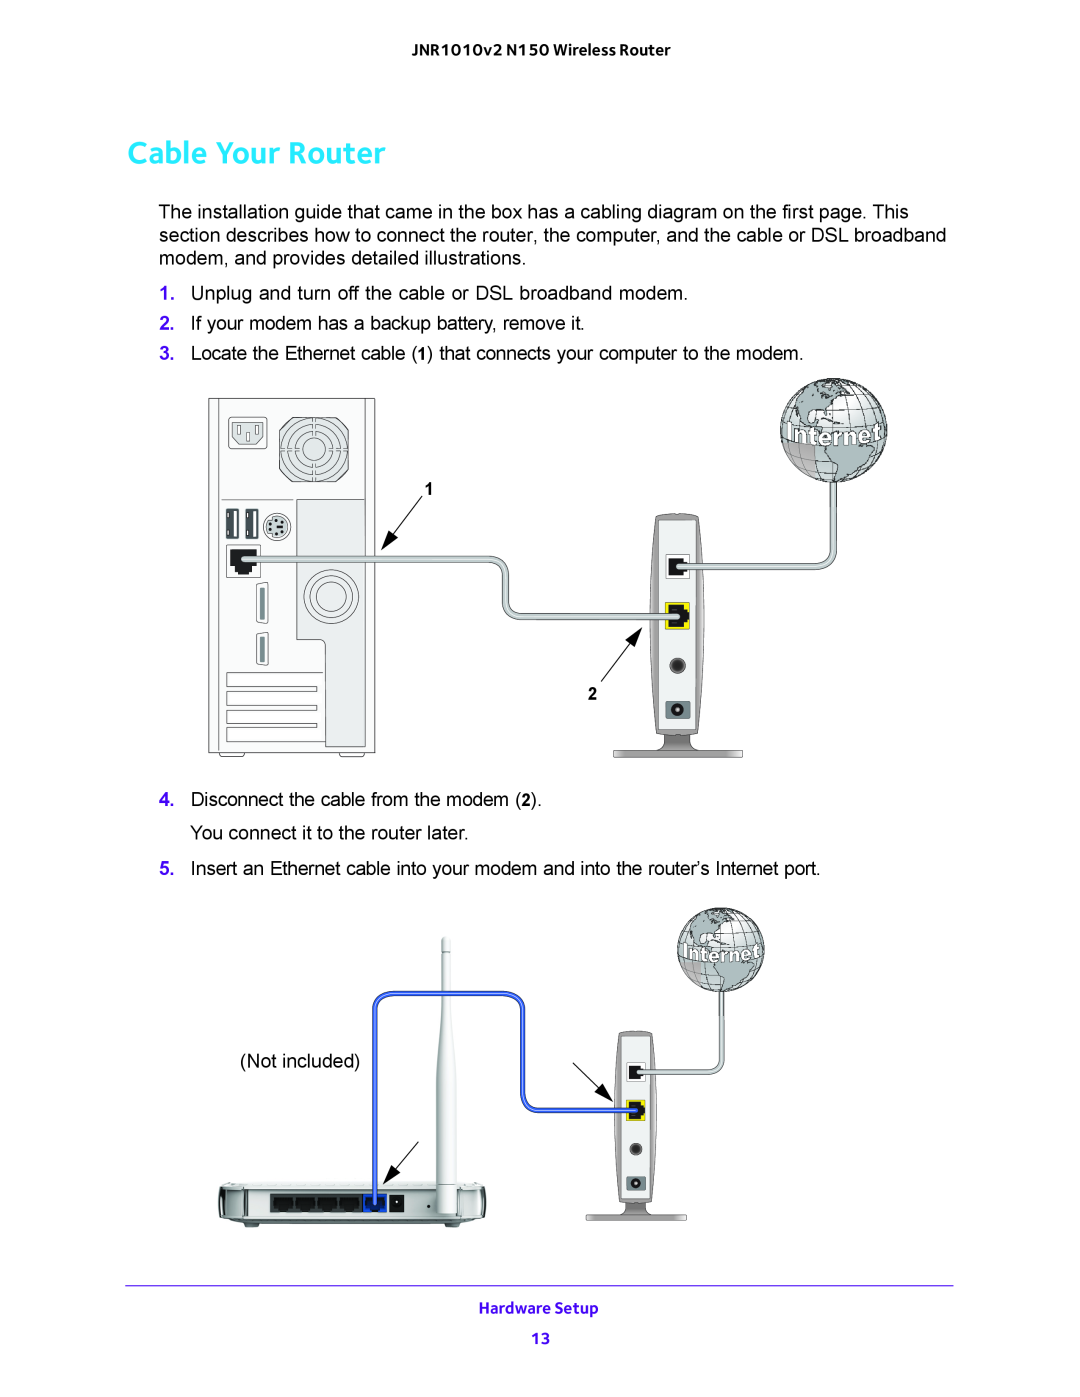 NETGEAR JNR1010V2 user manual Cable Your Router 